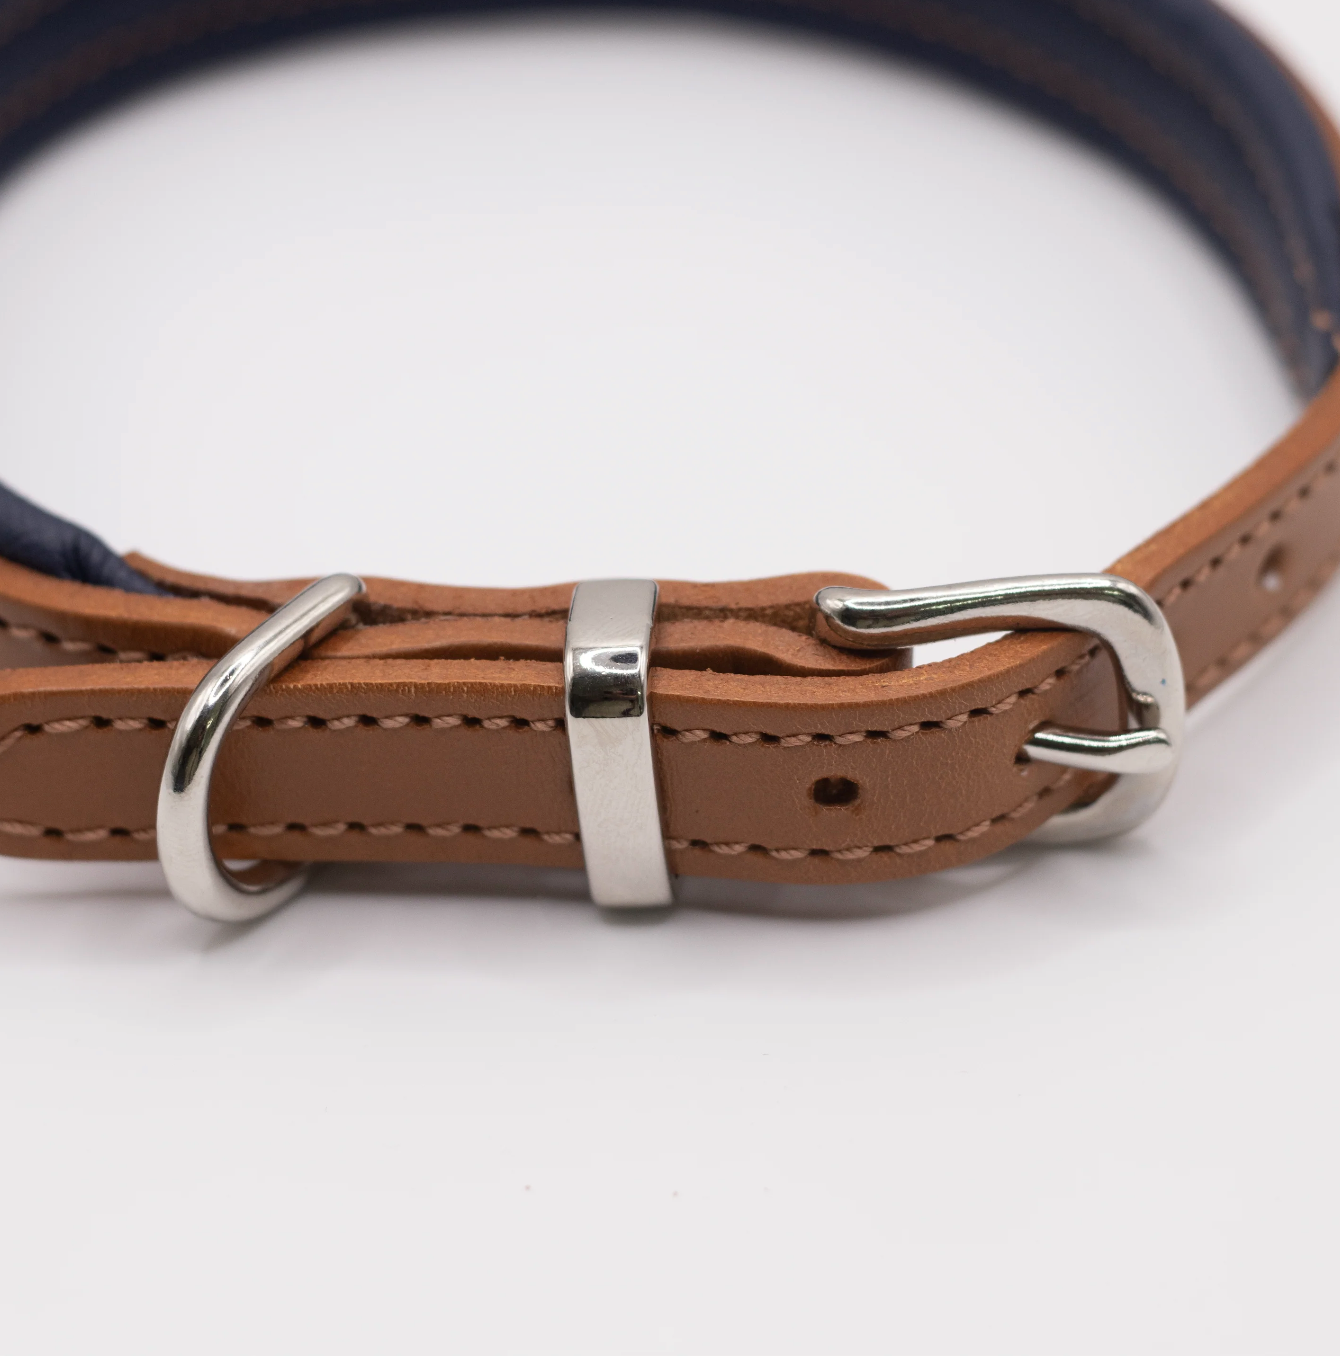 Padded Leather Dog Collar Tan and Navy